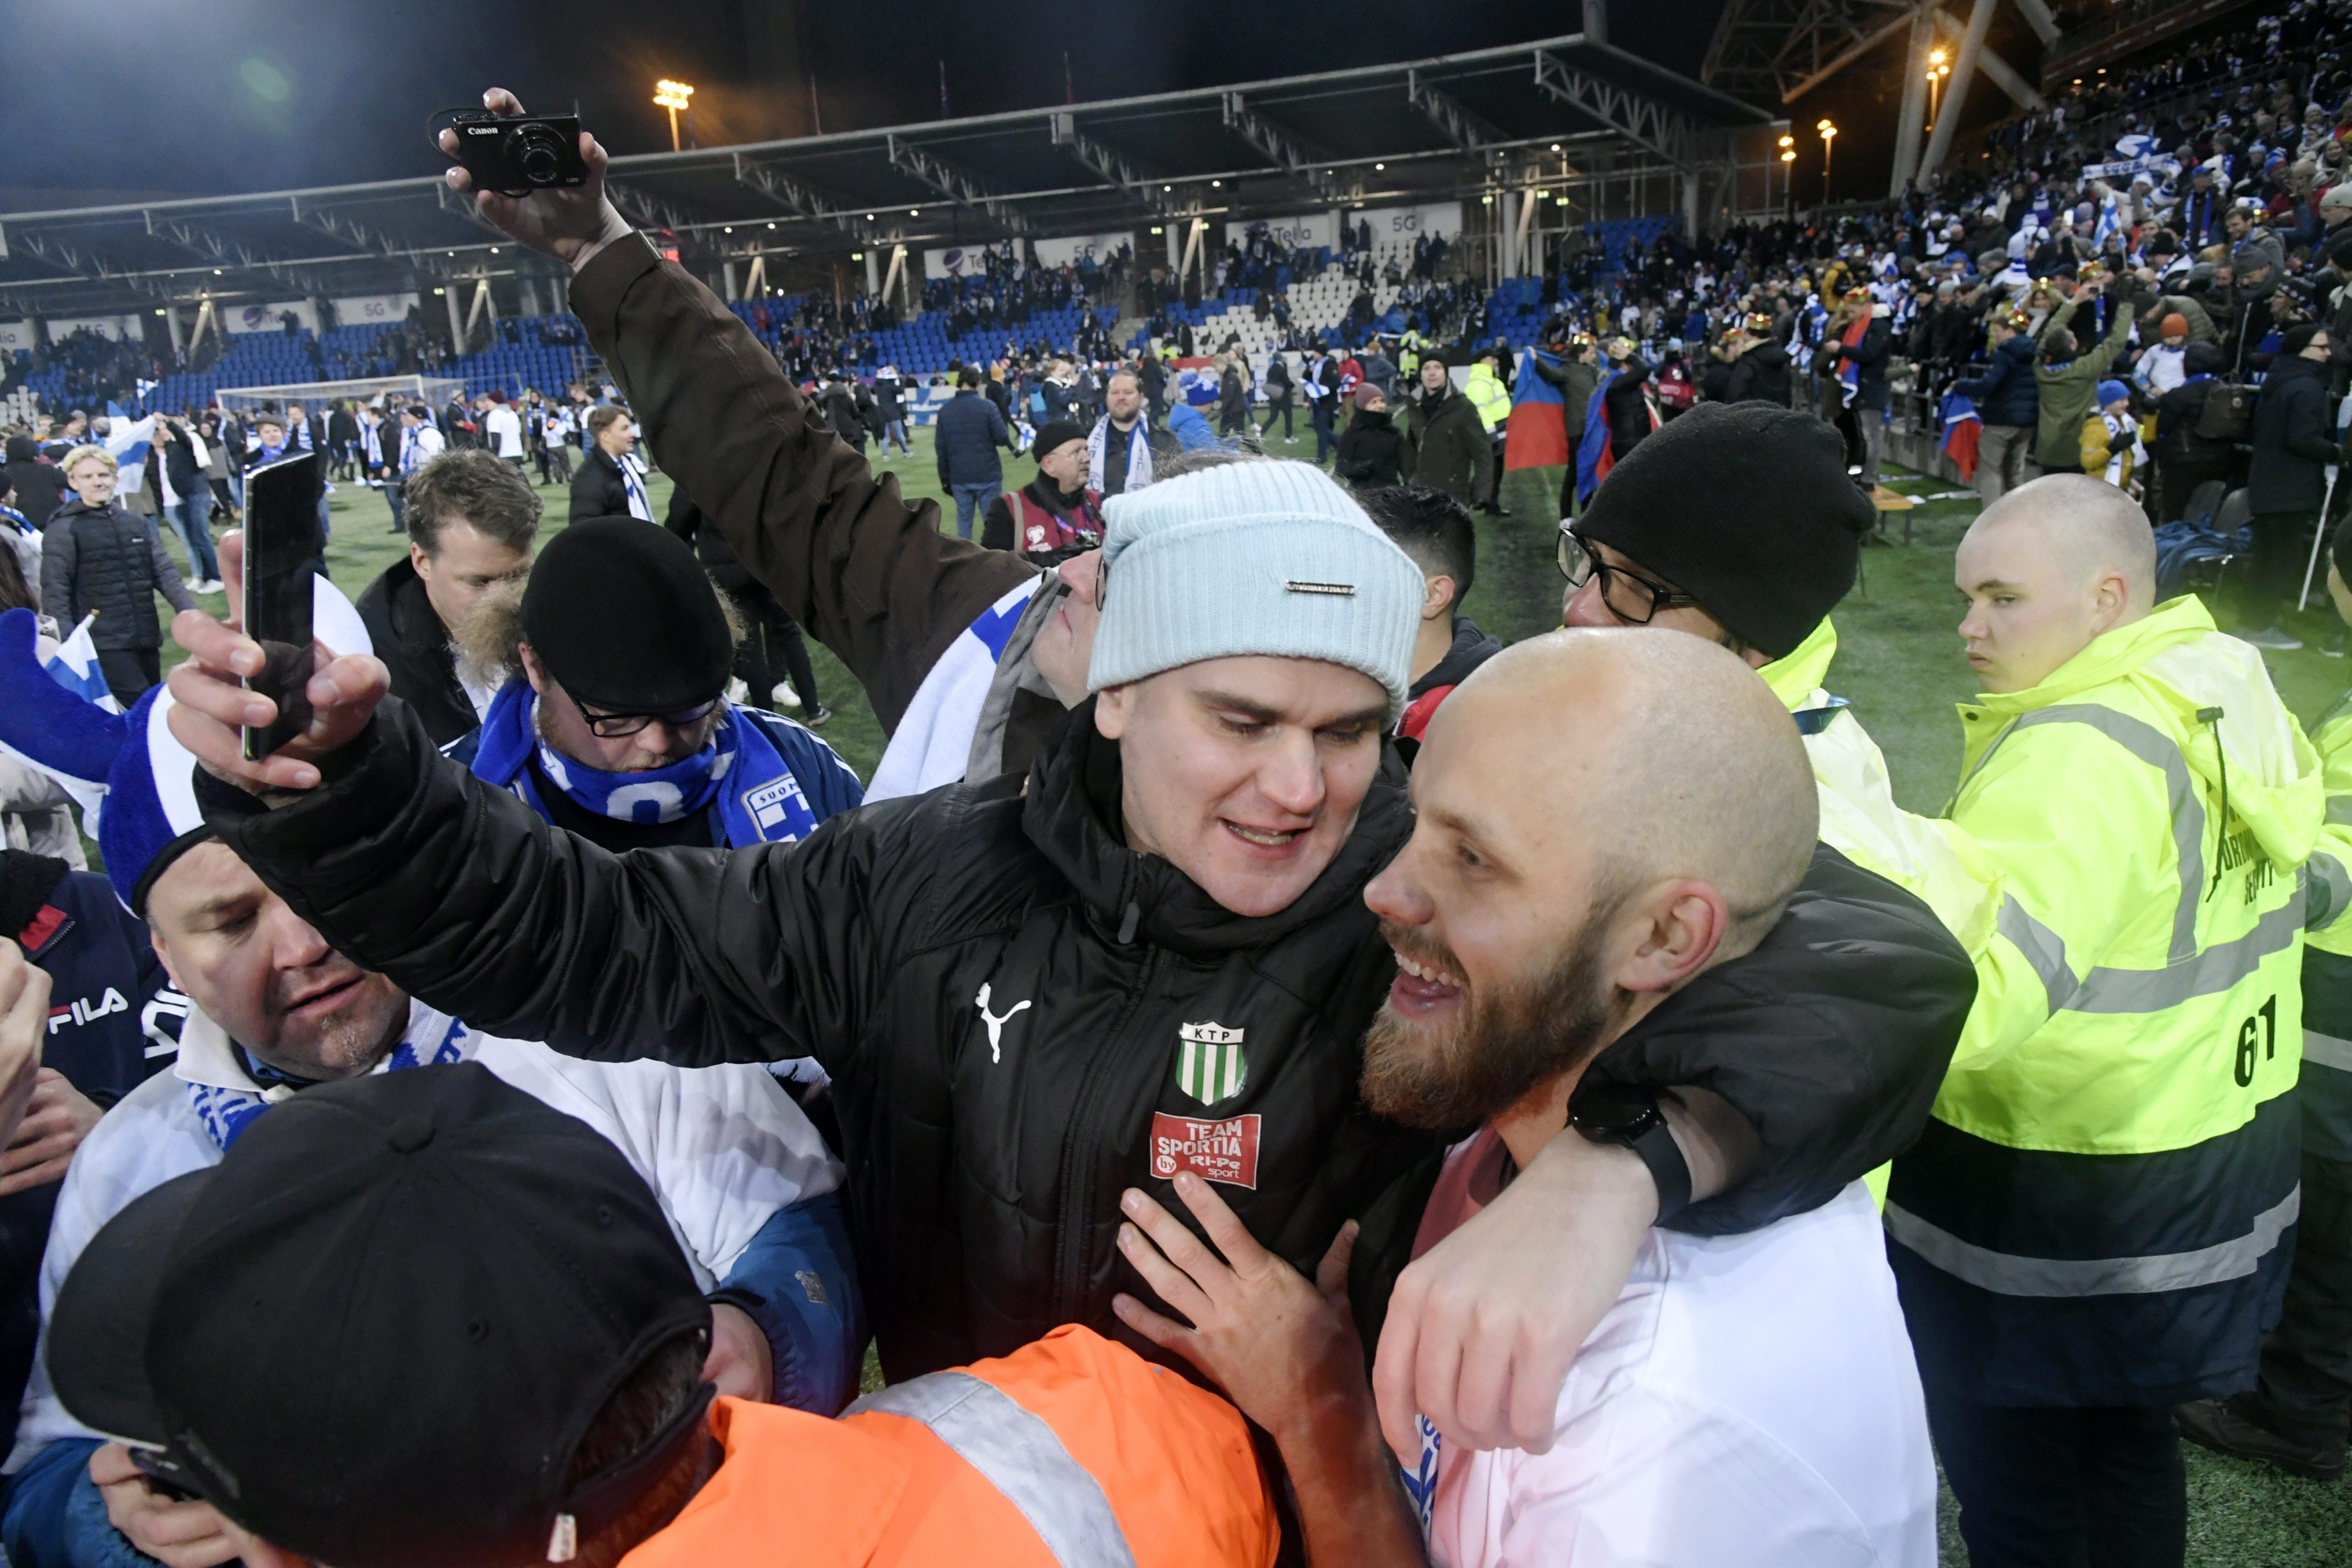 Teemu Pukki of Finland celebrates with fans after their victory in the Euro 2020 Group J qualifying soccer match between Finland and Liechtenstein in Helsinki, Finland, on Friday.